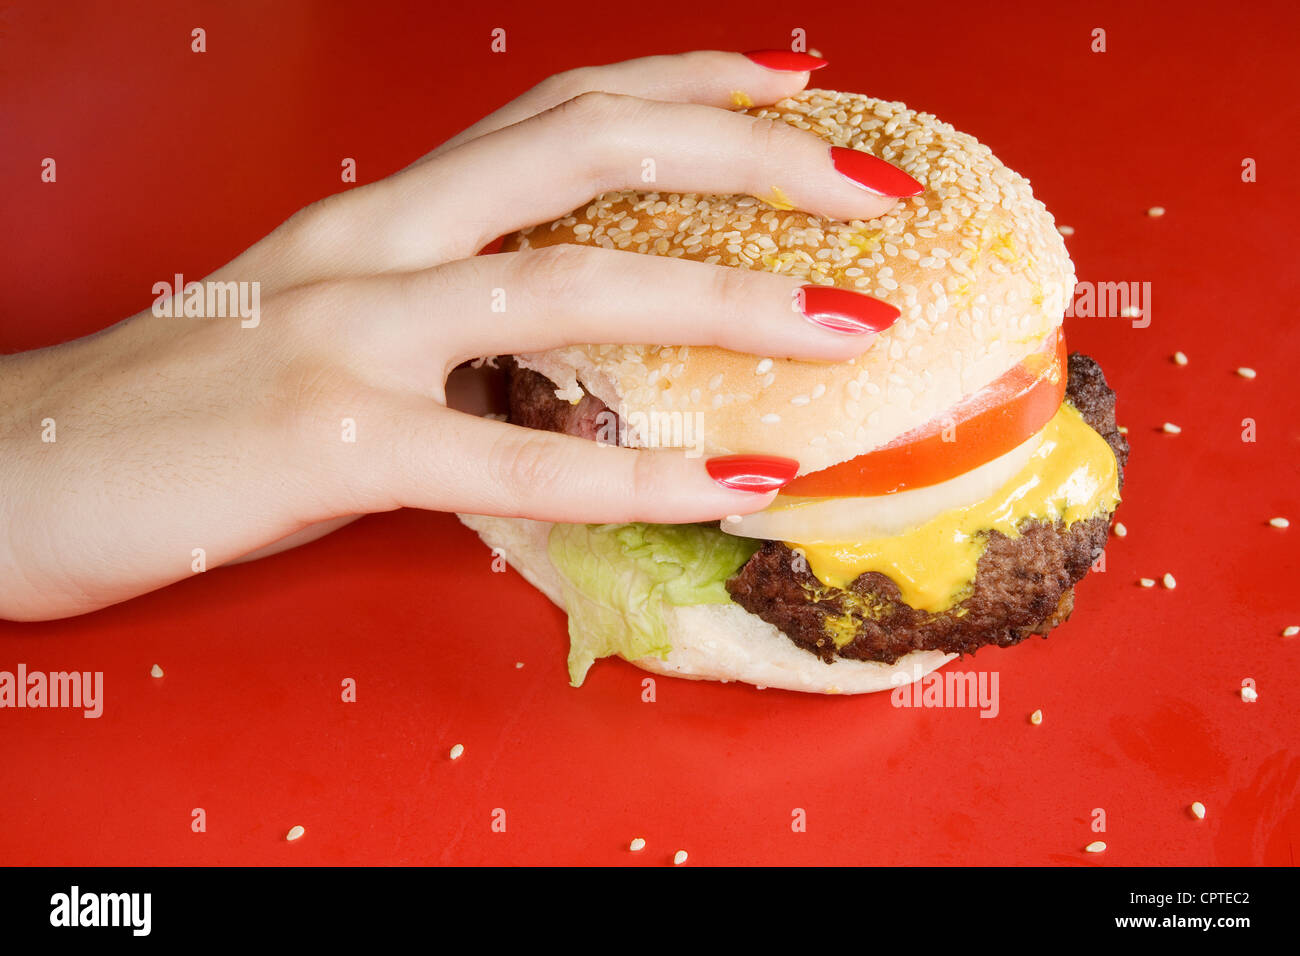 Woman with red fingernails holding burger Stock Photo